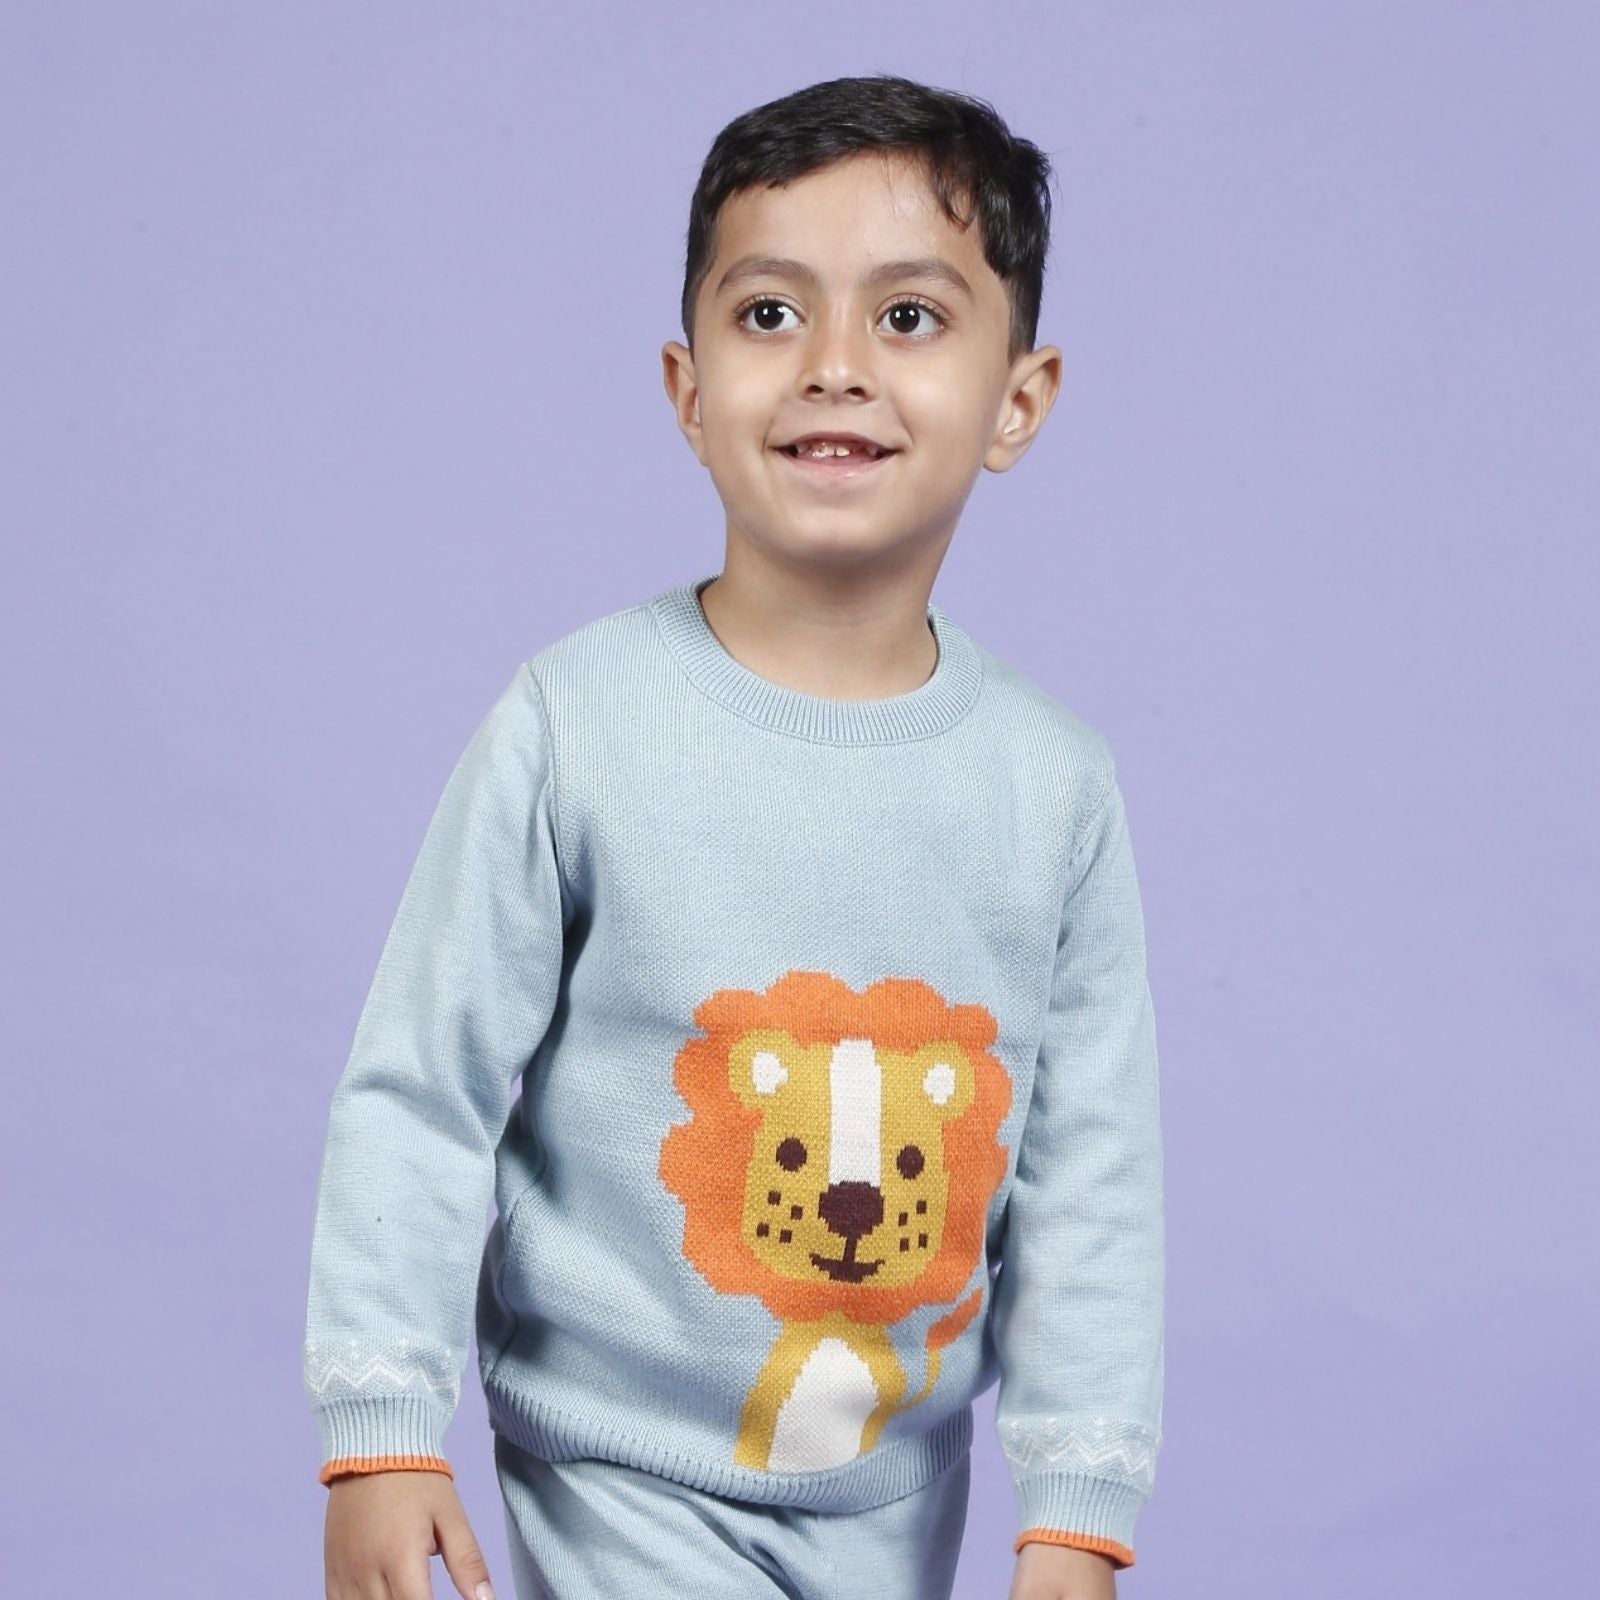 Greendeer Delighted Lion & Sunny Fox 100% Cotton Sweater Set of 2